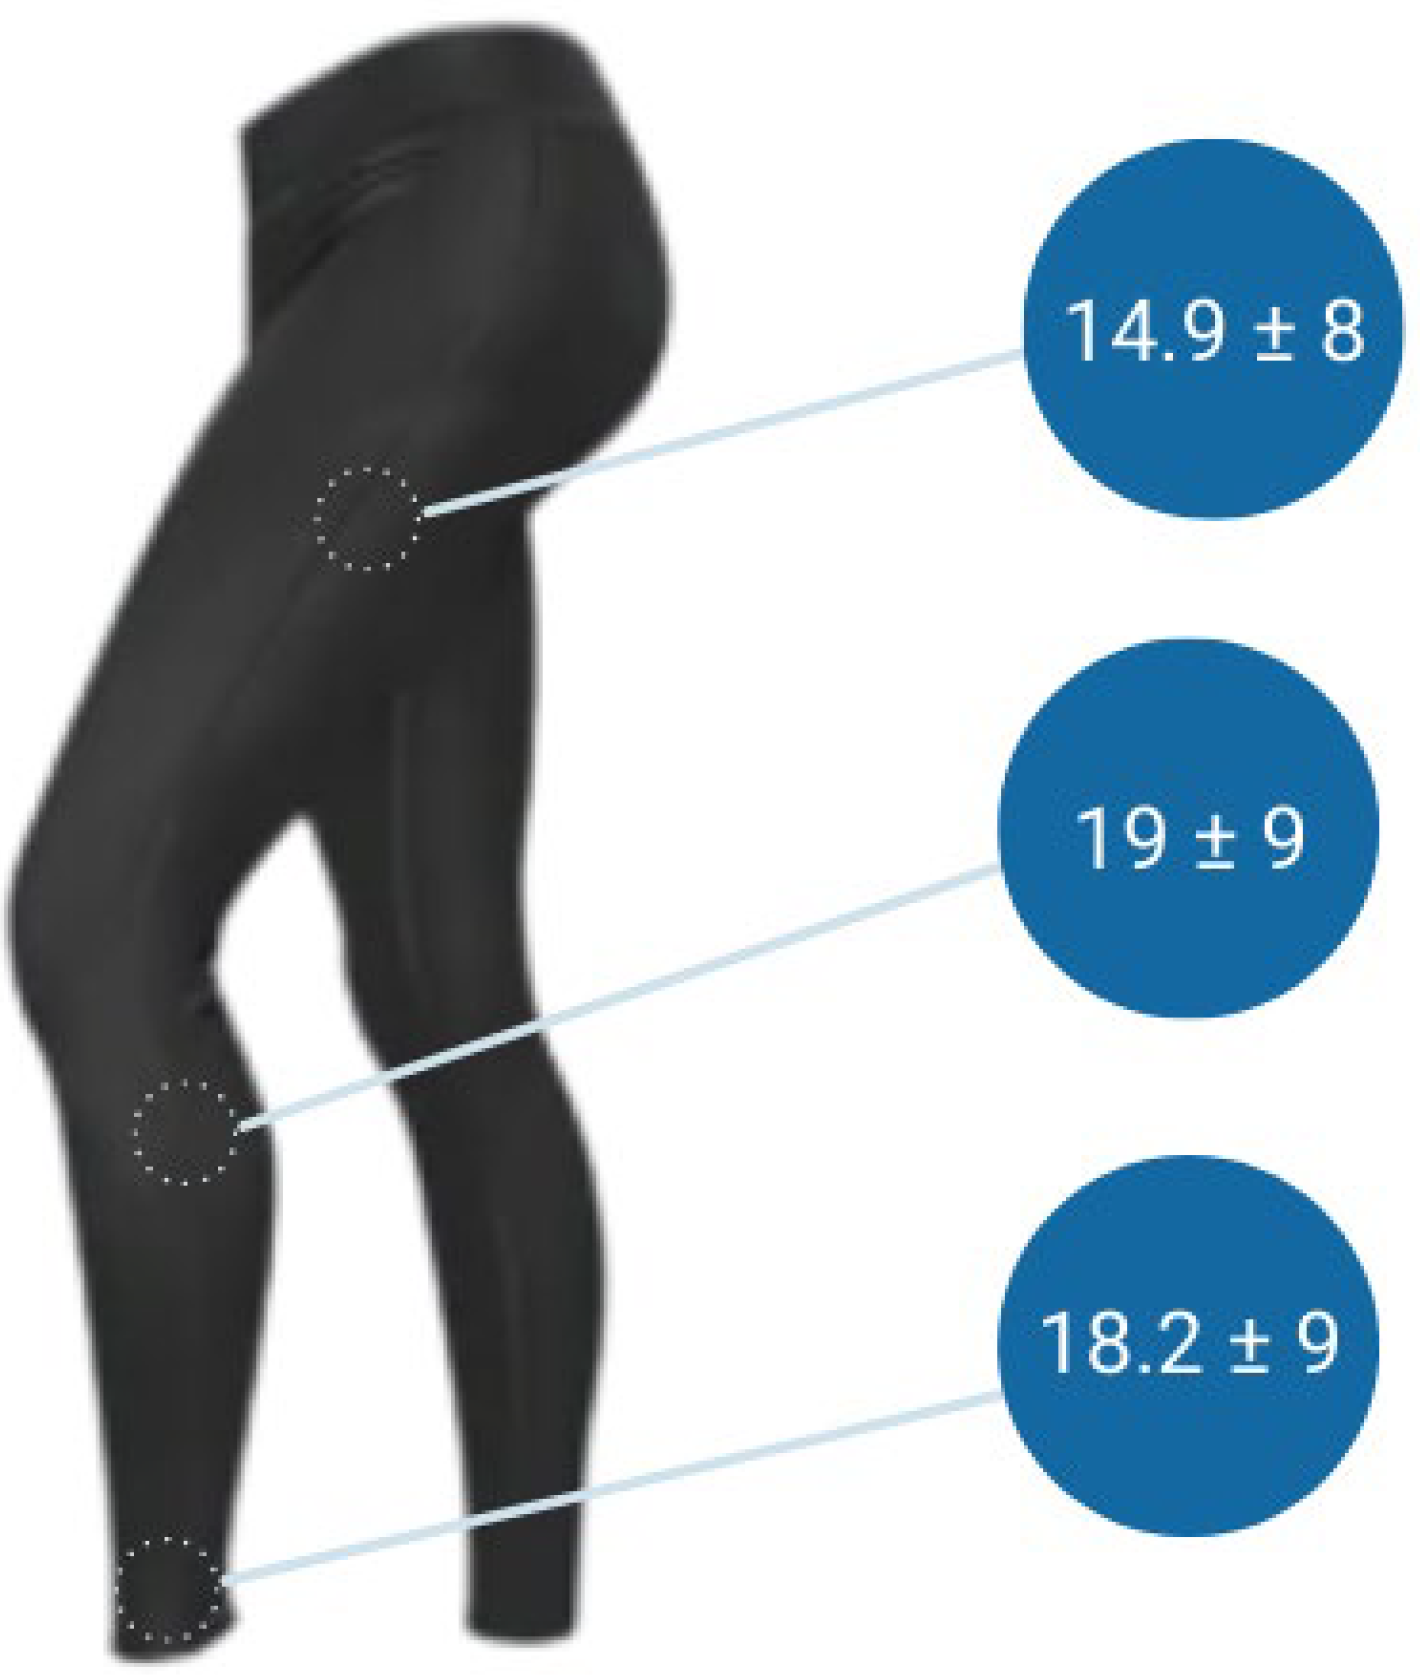 5 Reasons Why Compression Garments Are Important for Recovery